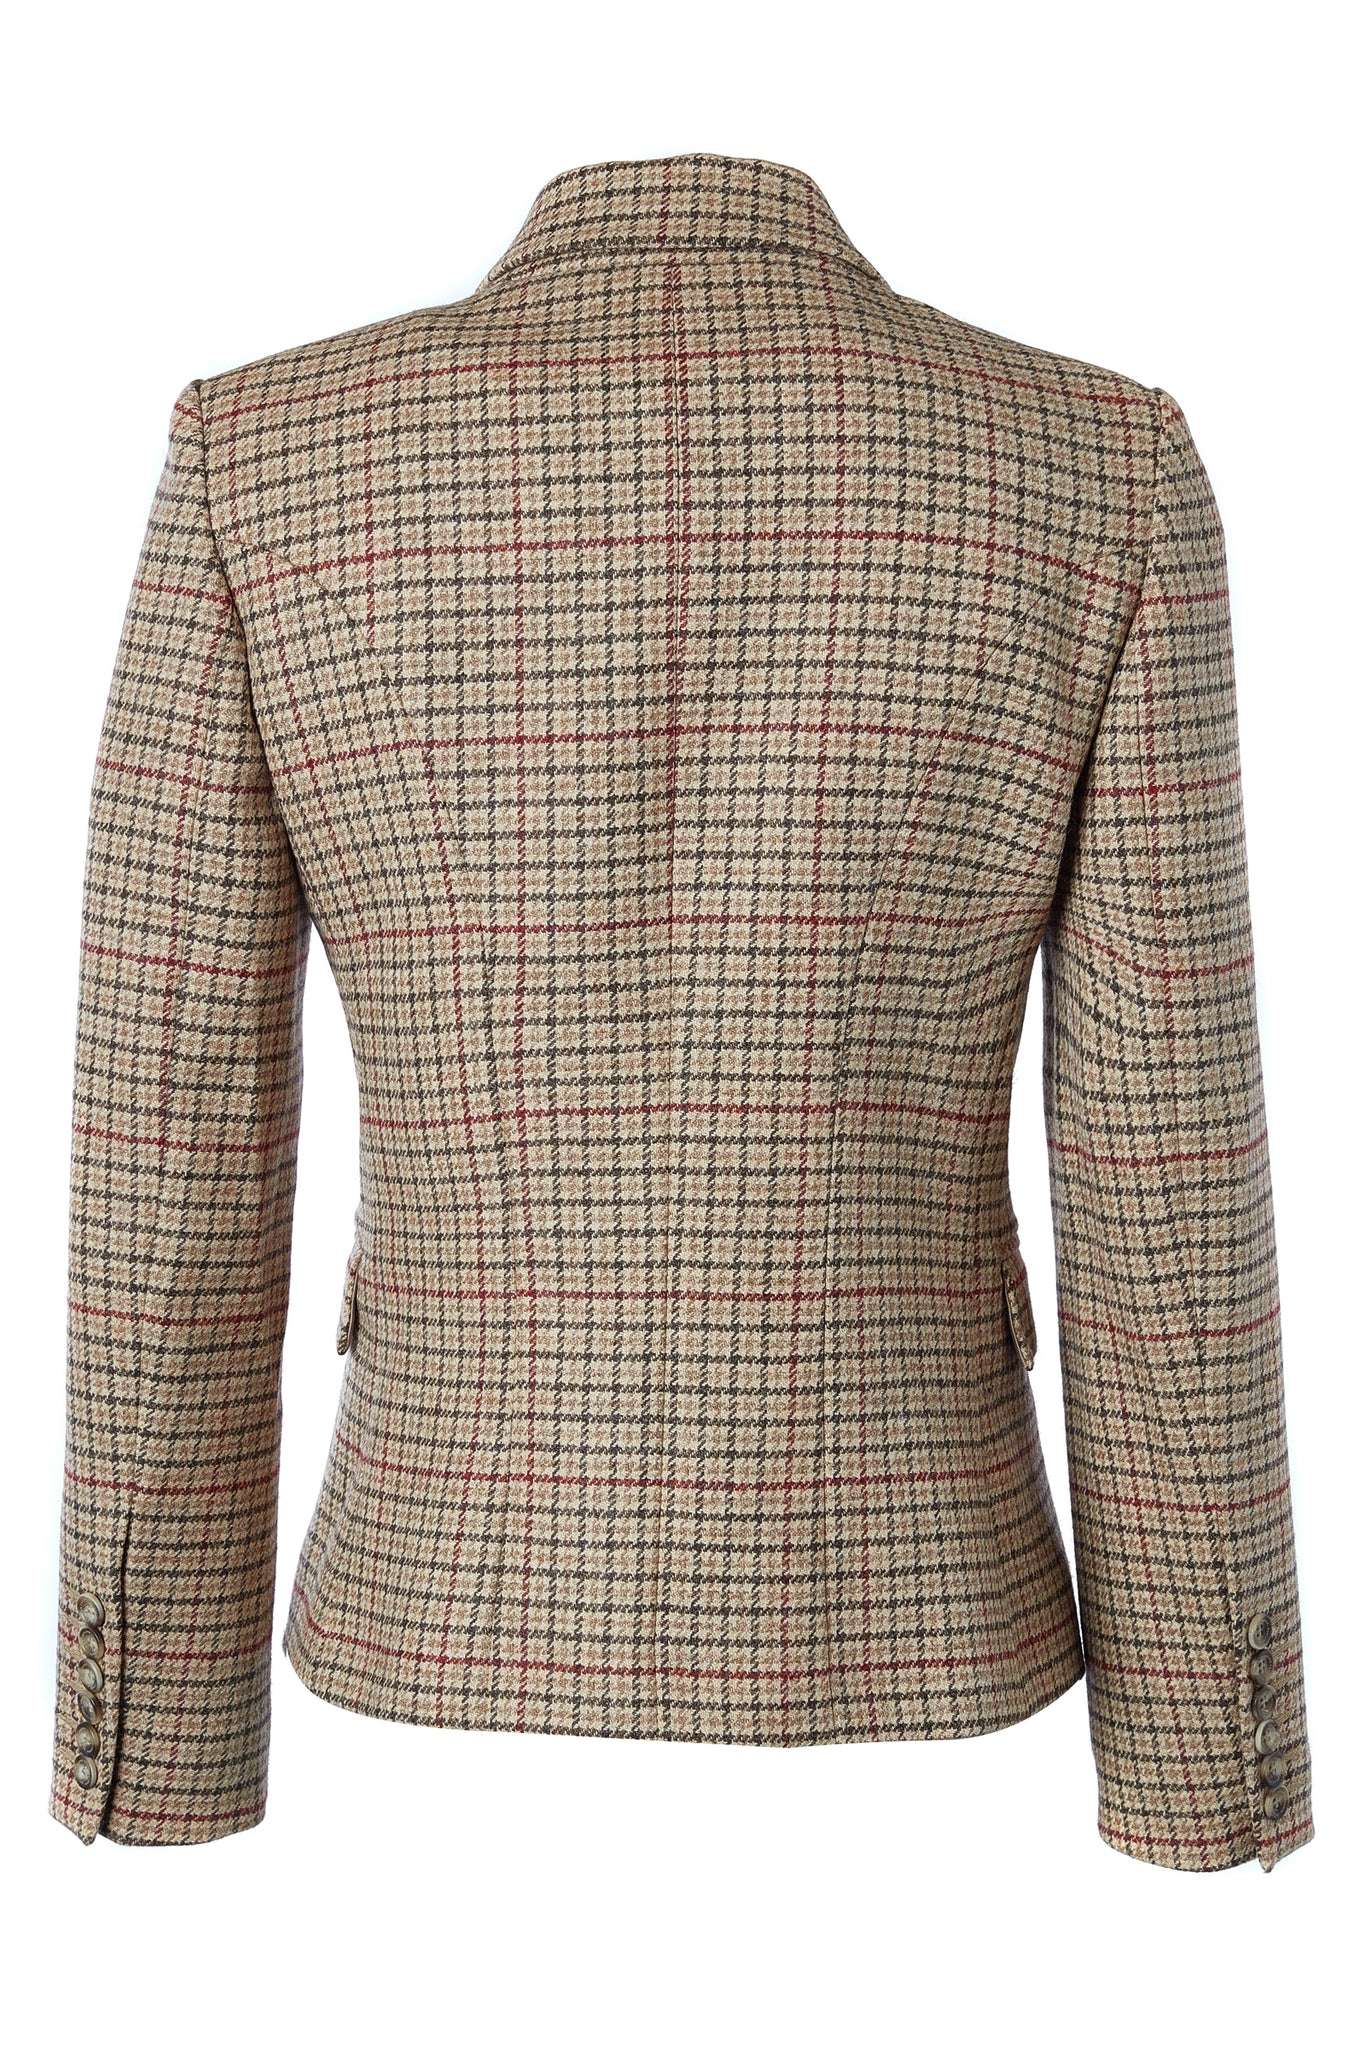 back of British made double breasted blazer that fastens with a single button hole to create a more form fitting silhouette with two pockets and horn button detailing this blazer is made from camel coloured charlton tweed